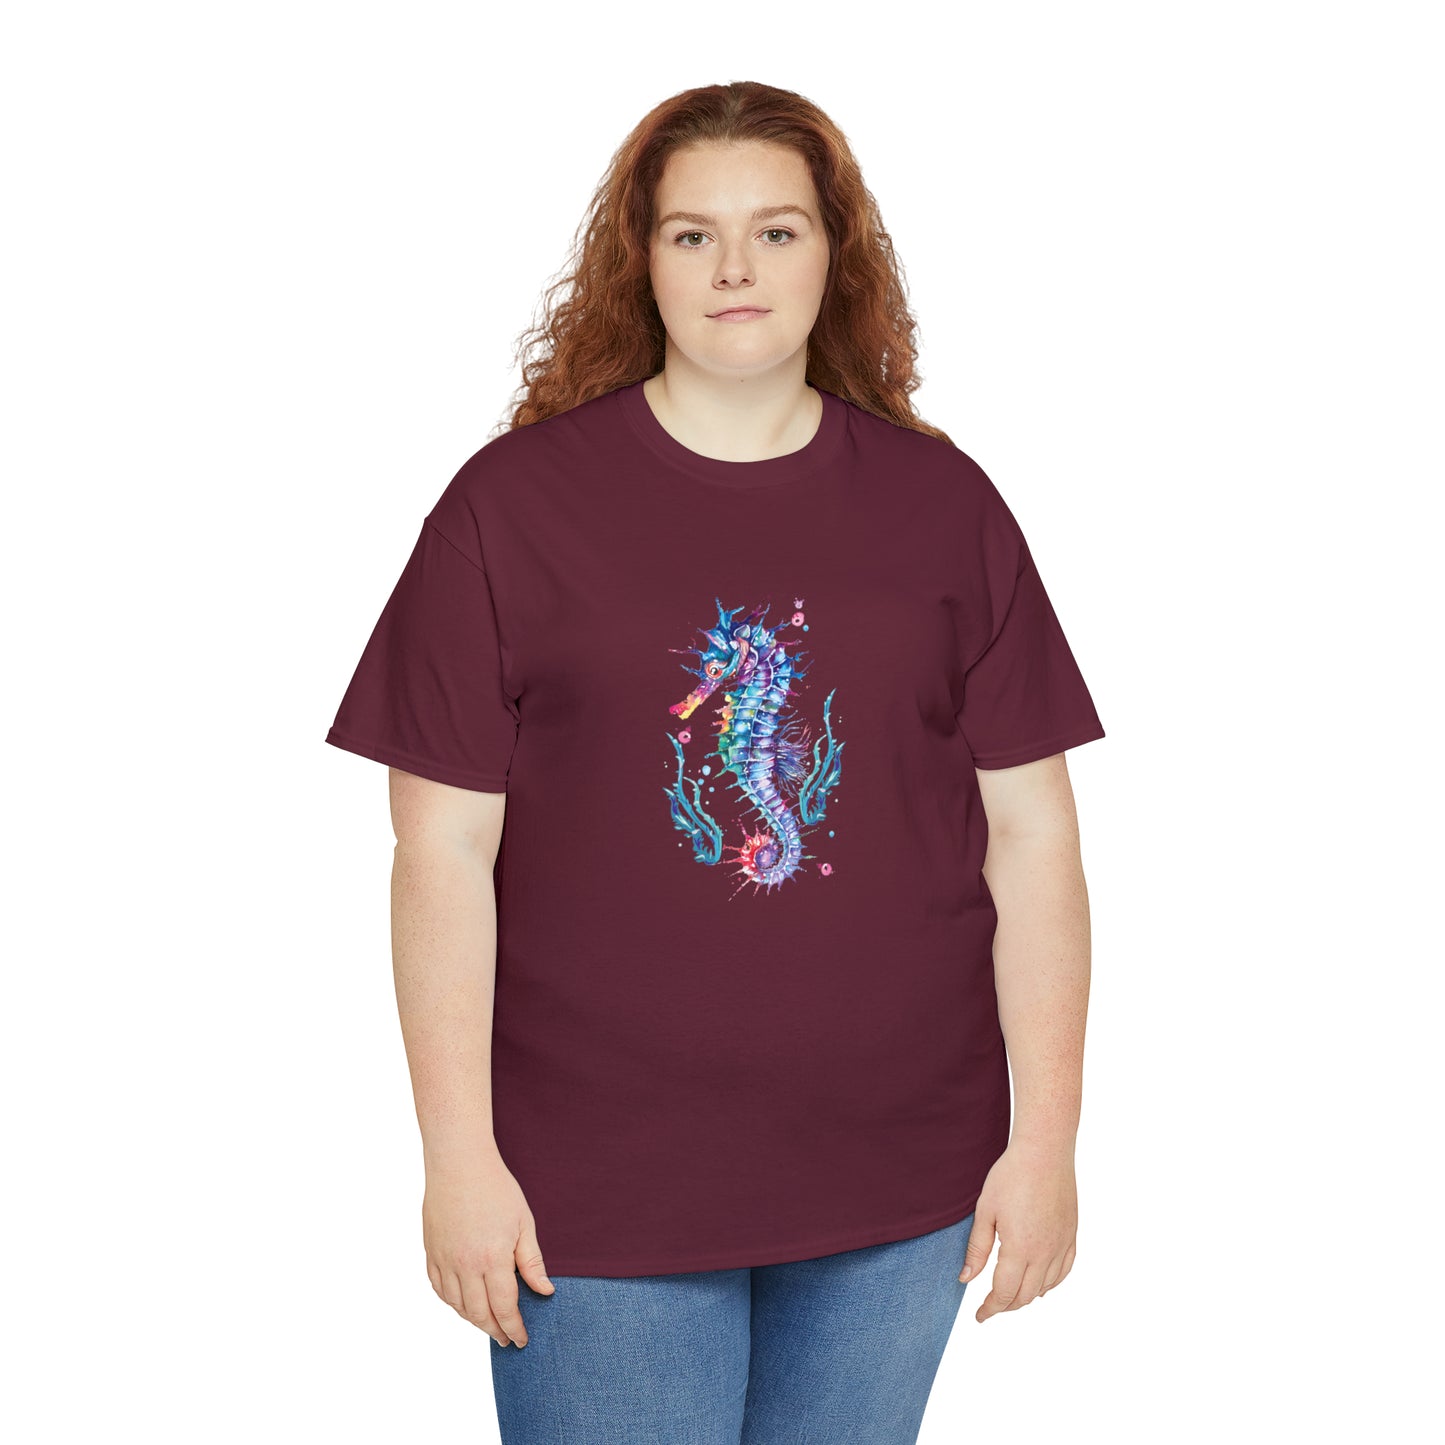 Mock up of a plus-size woman wearing the Maroon shirt